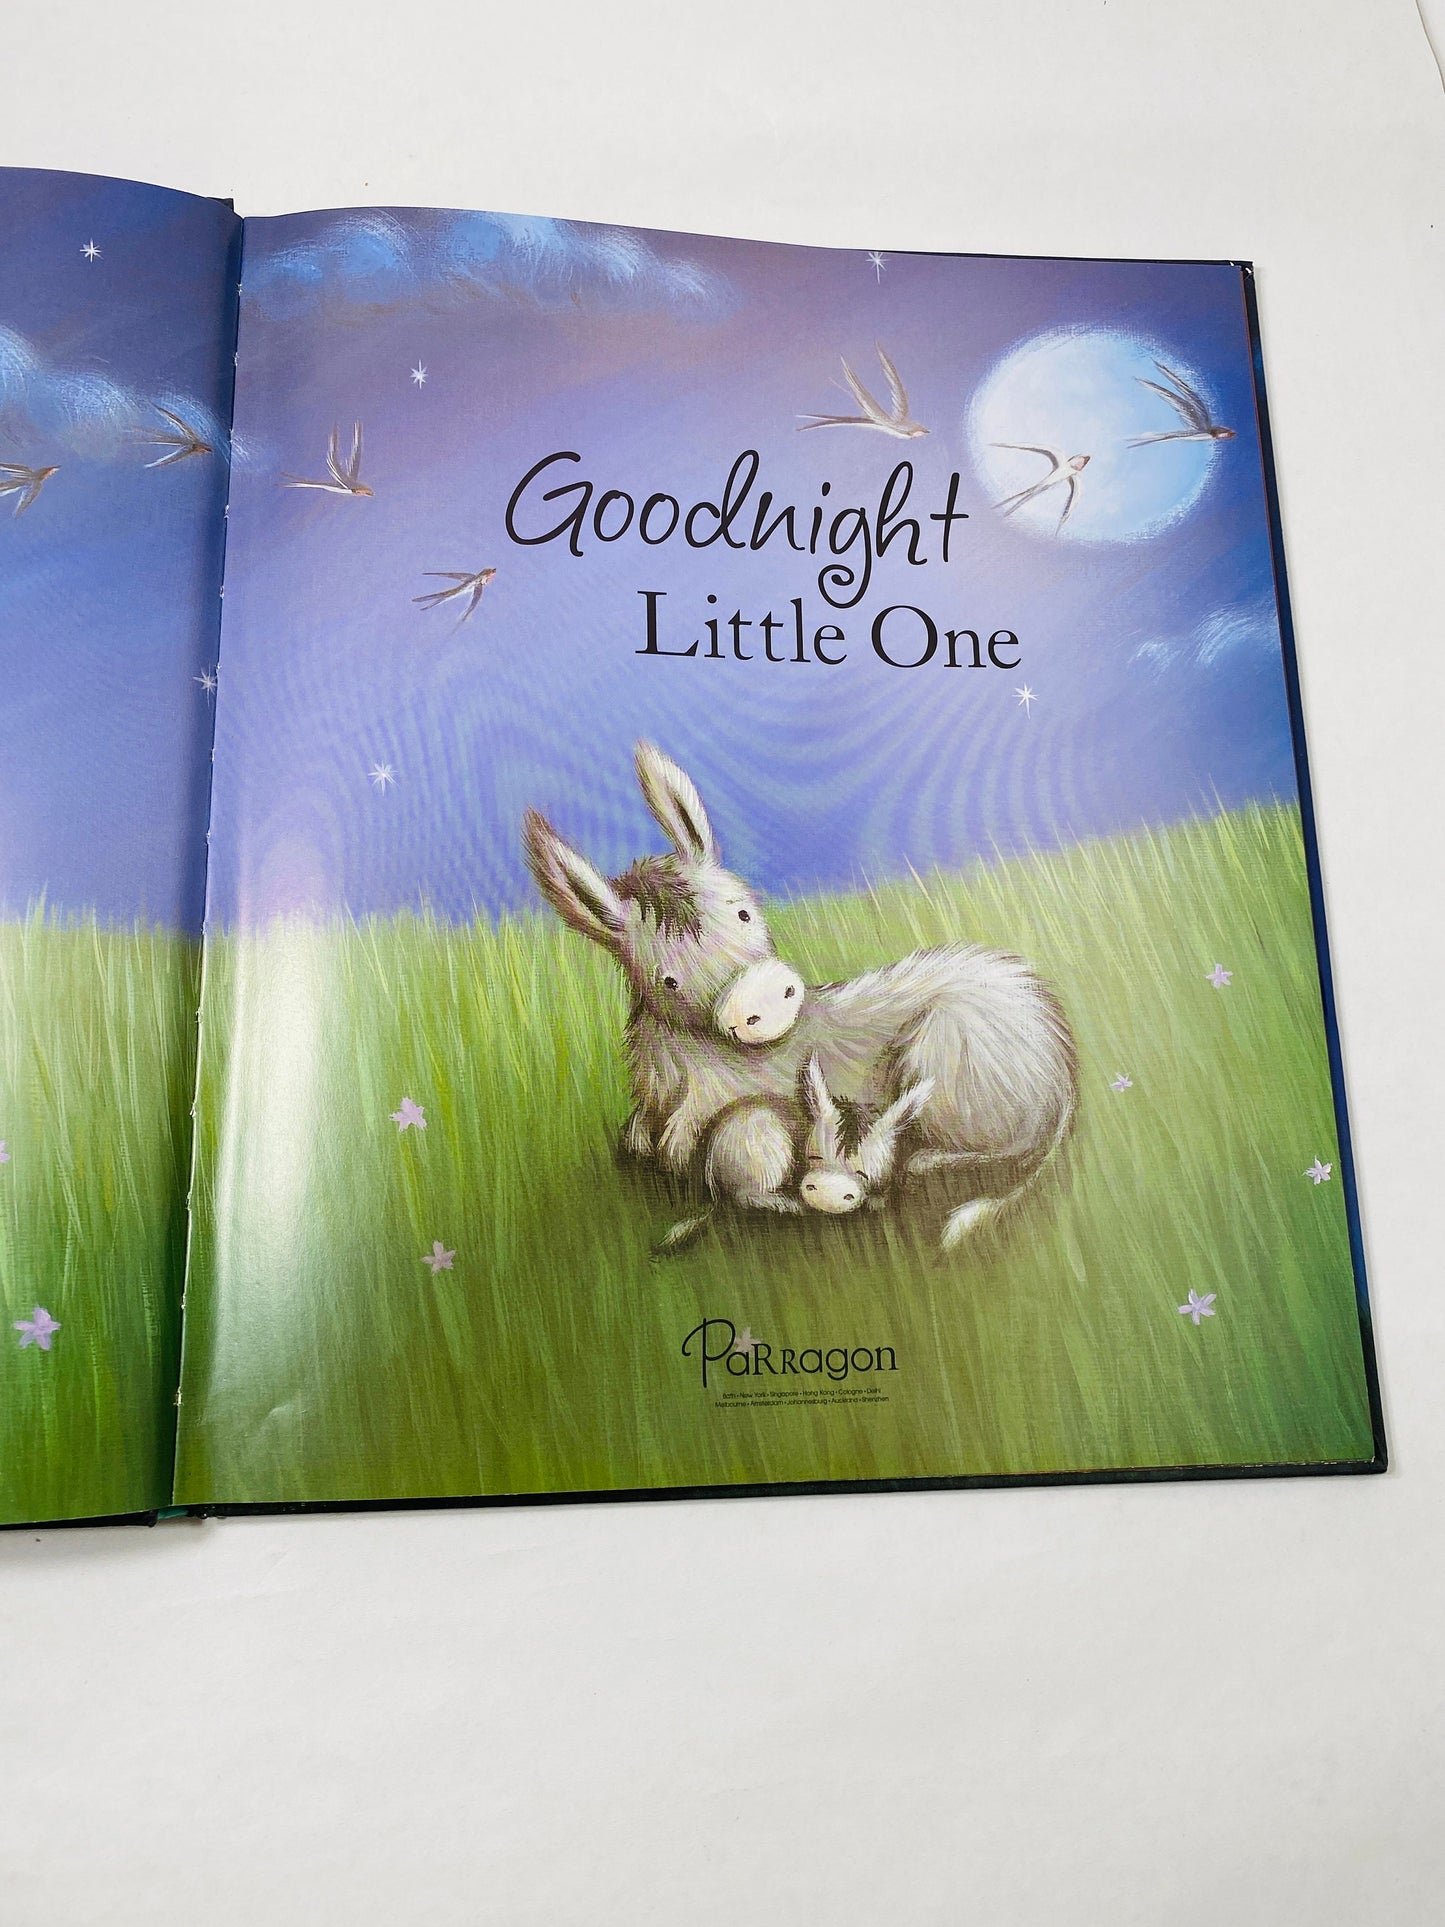 Goodnight Little One by Margaret Wise Brown illustrated by Rebecca Elliott Vintage children's book by author of Goodnight Moon